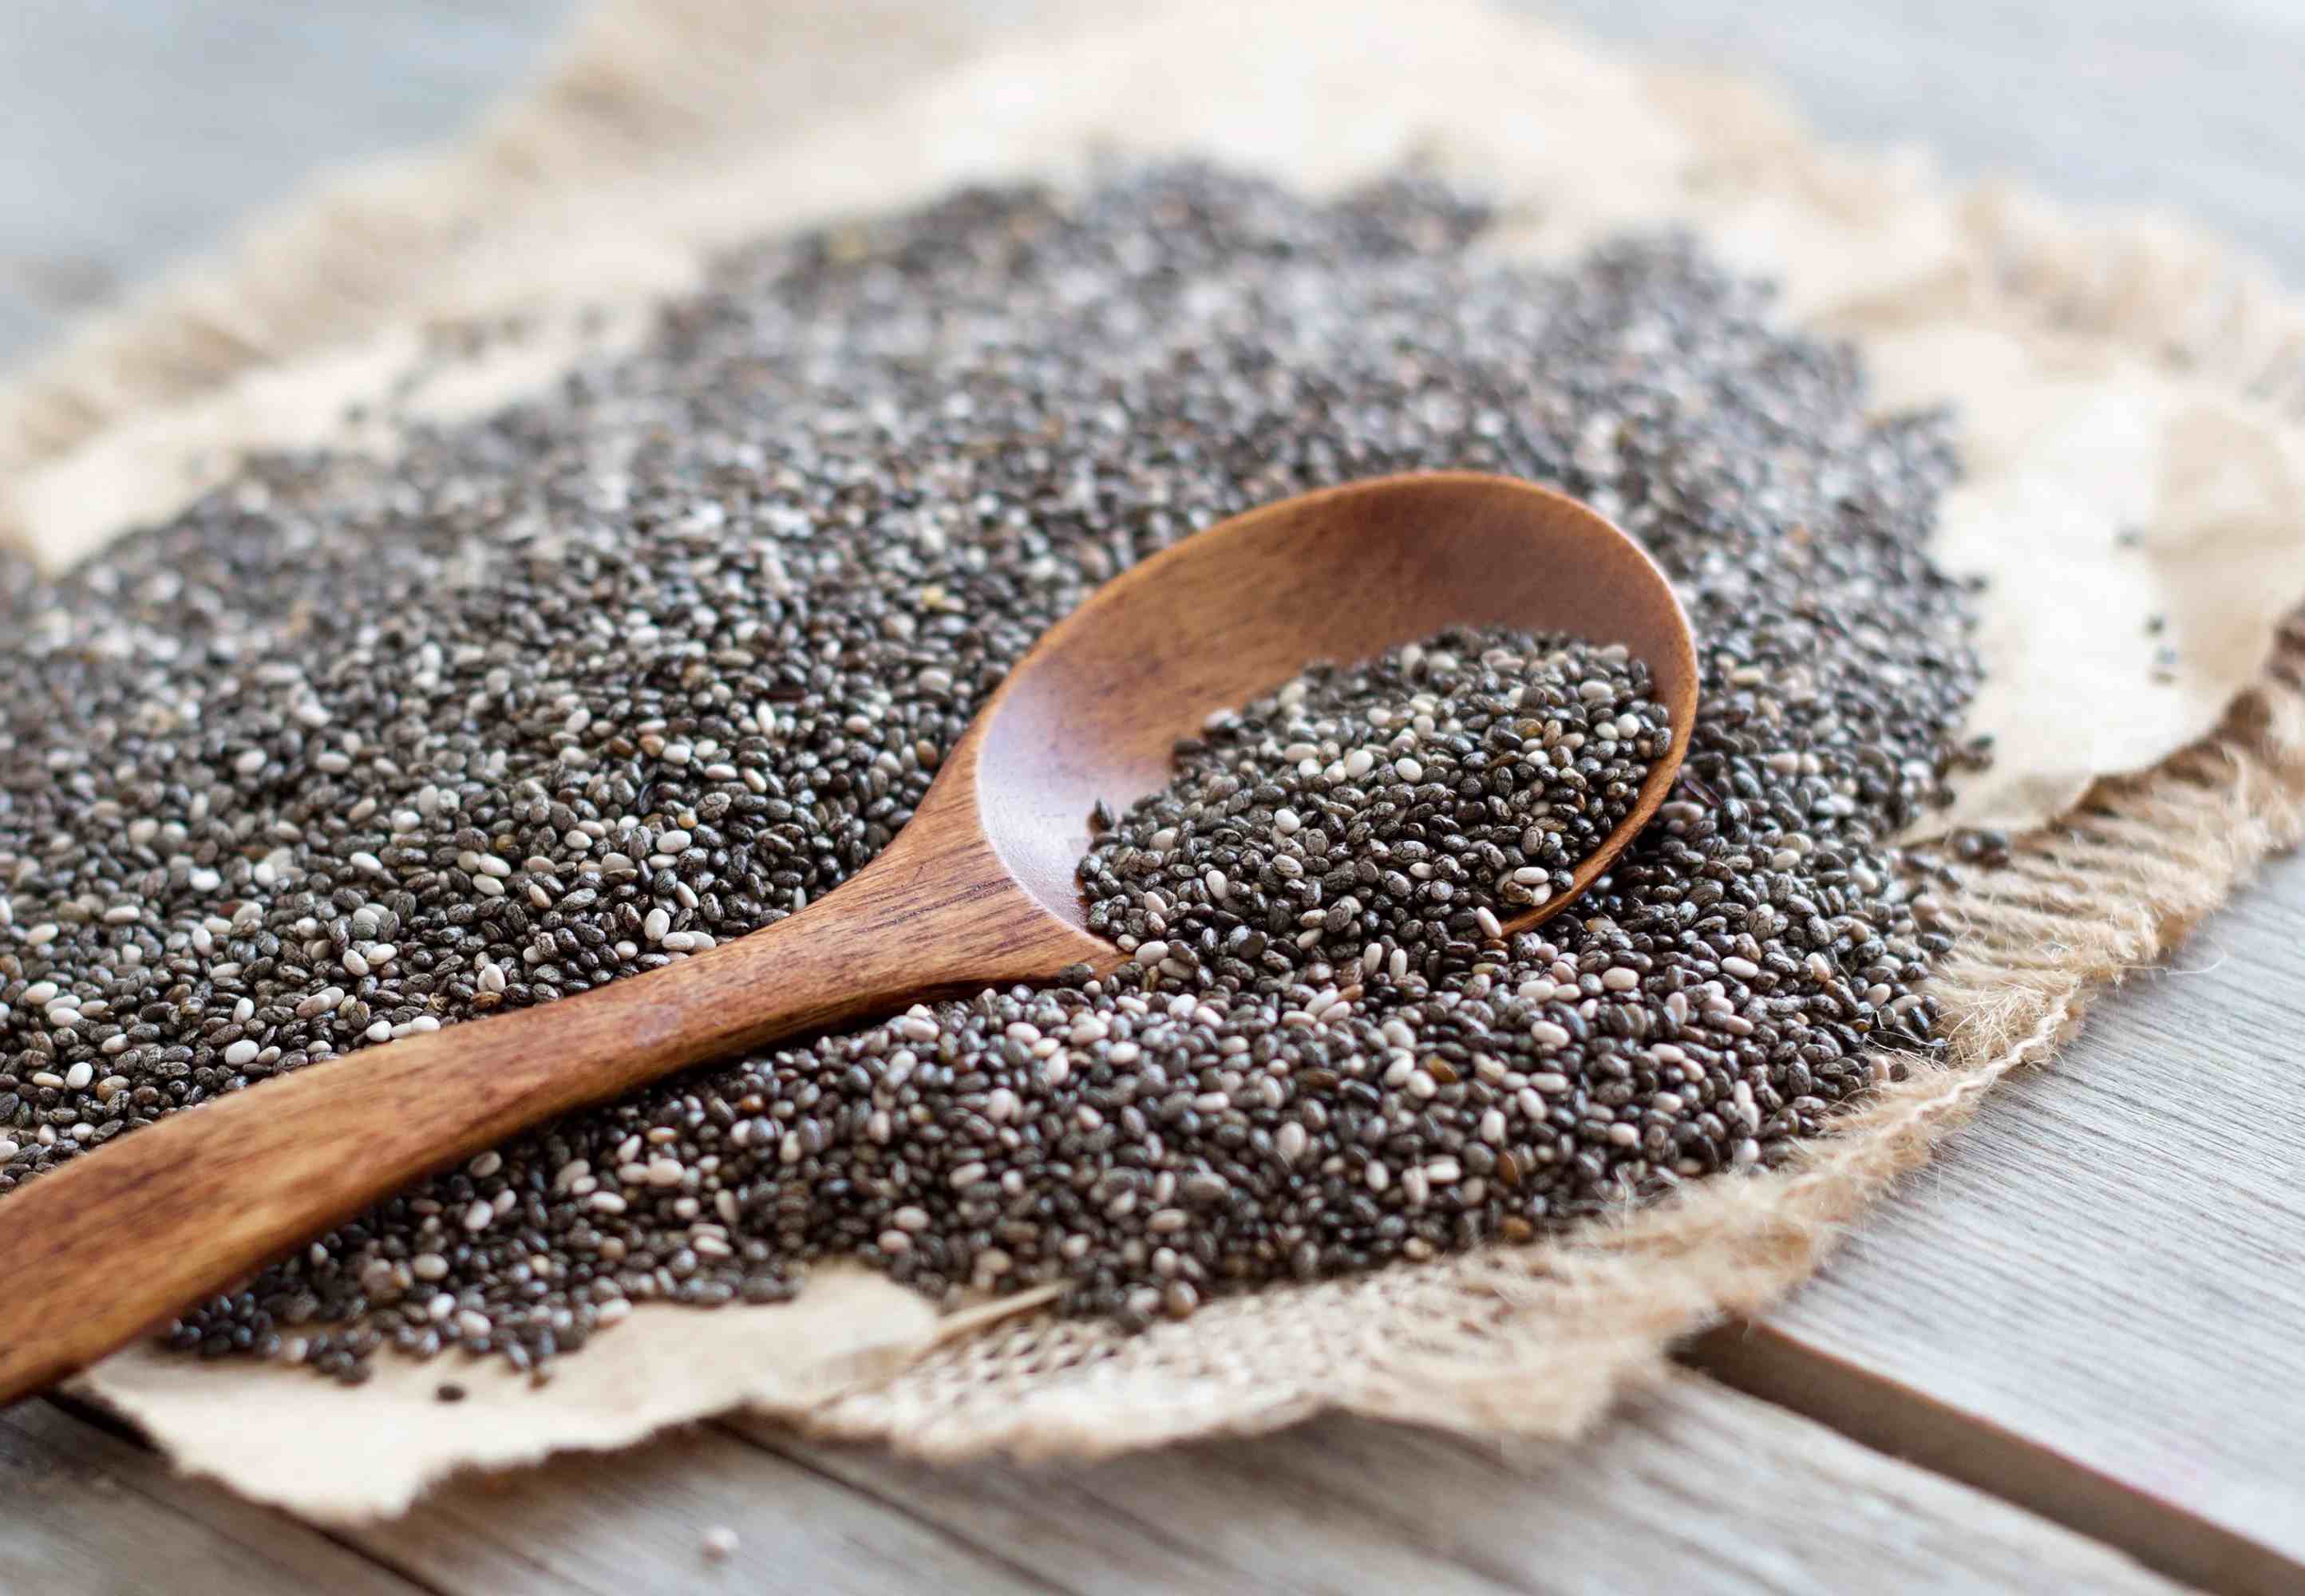 What Can You Make With Chia Seeds